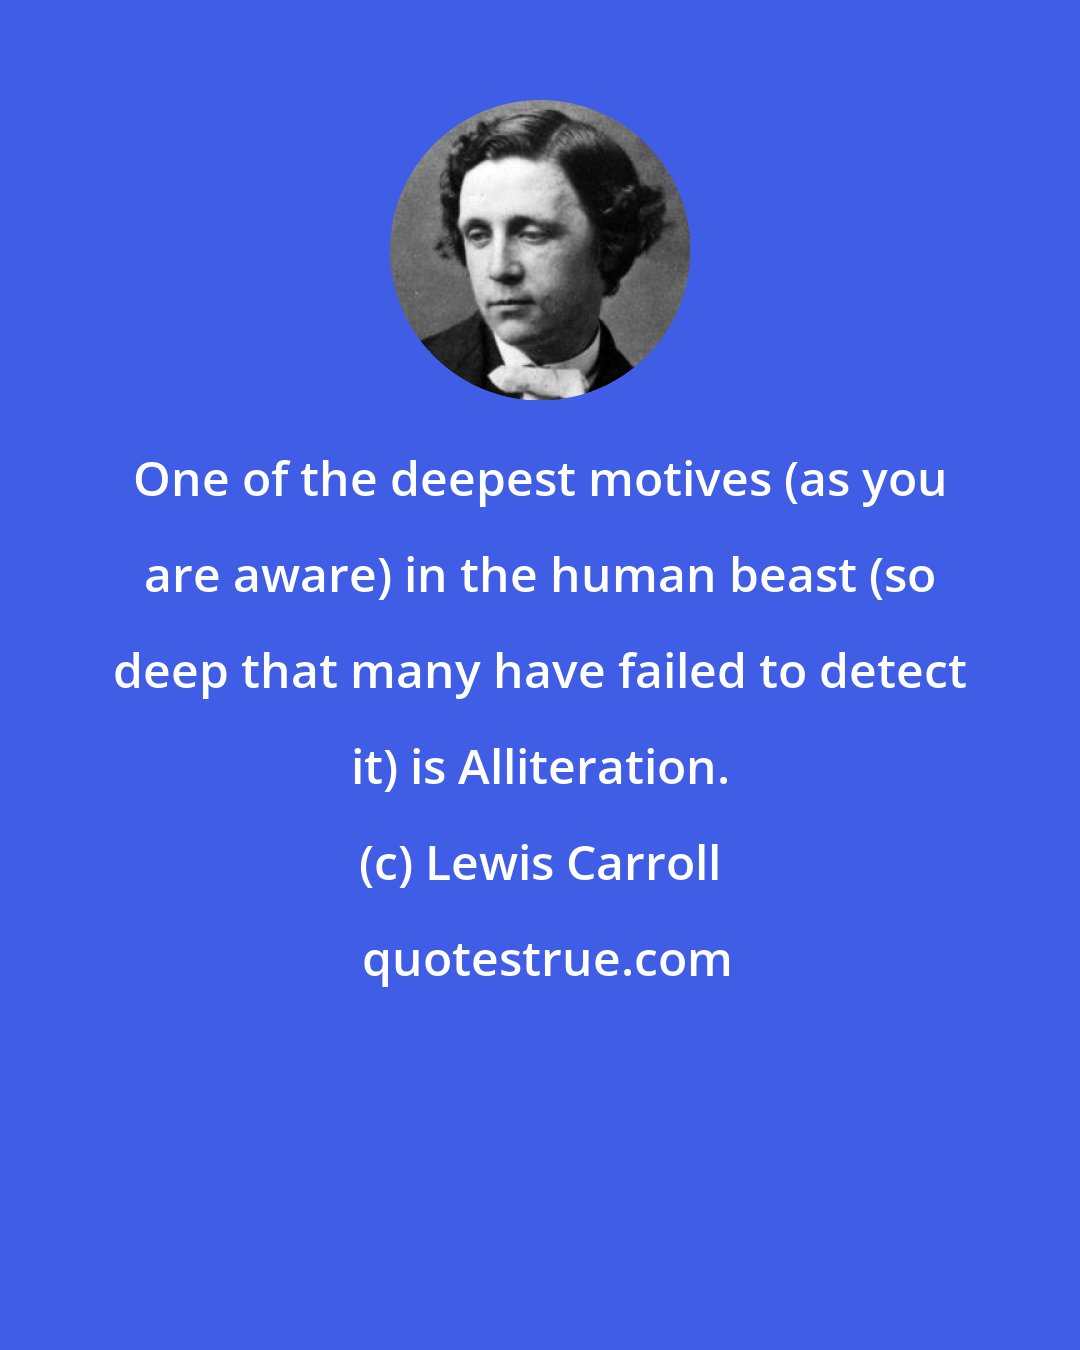 Lewis Carroll: One of the deepest motives (as you are aware) in the human beast (so deep that many have failed to detect it) is Alliteration.